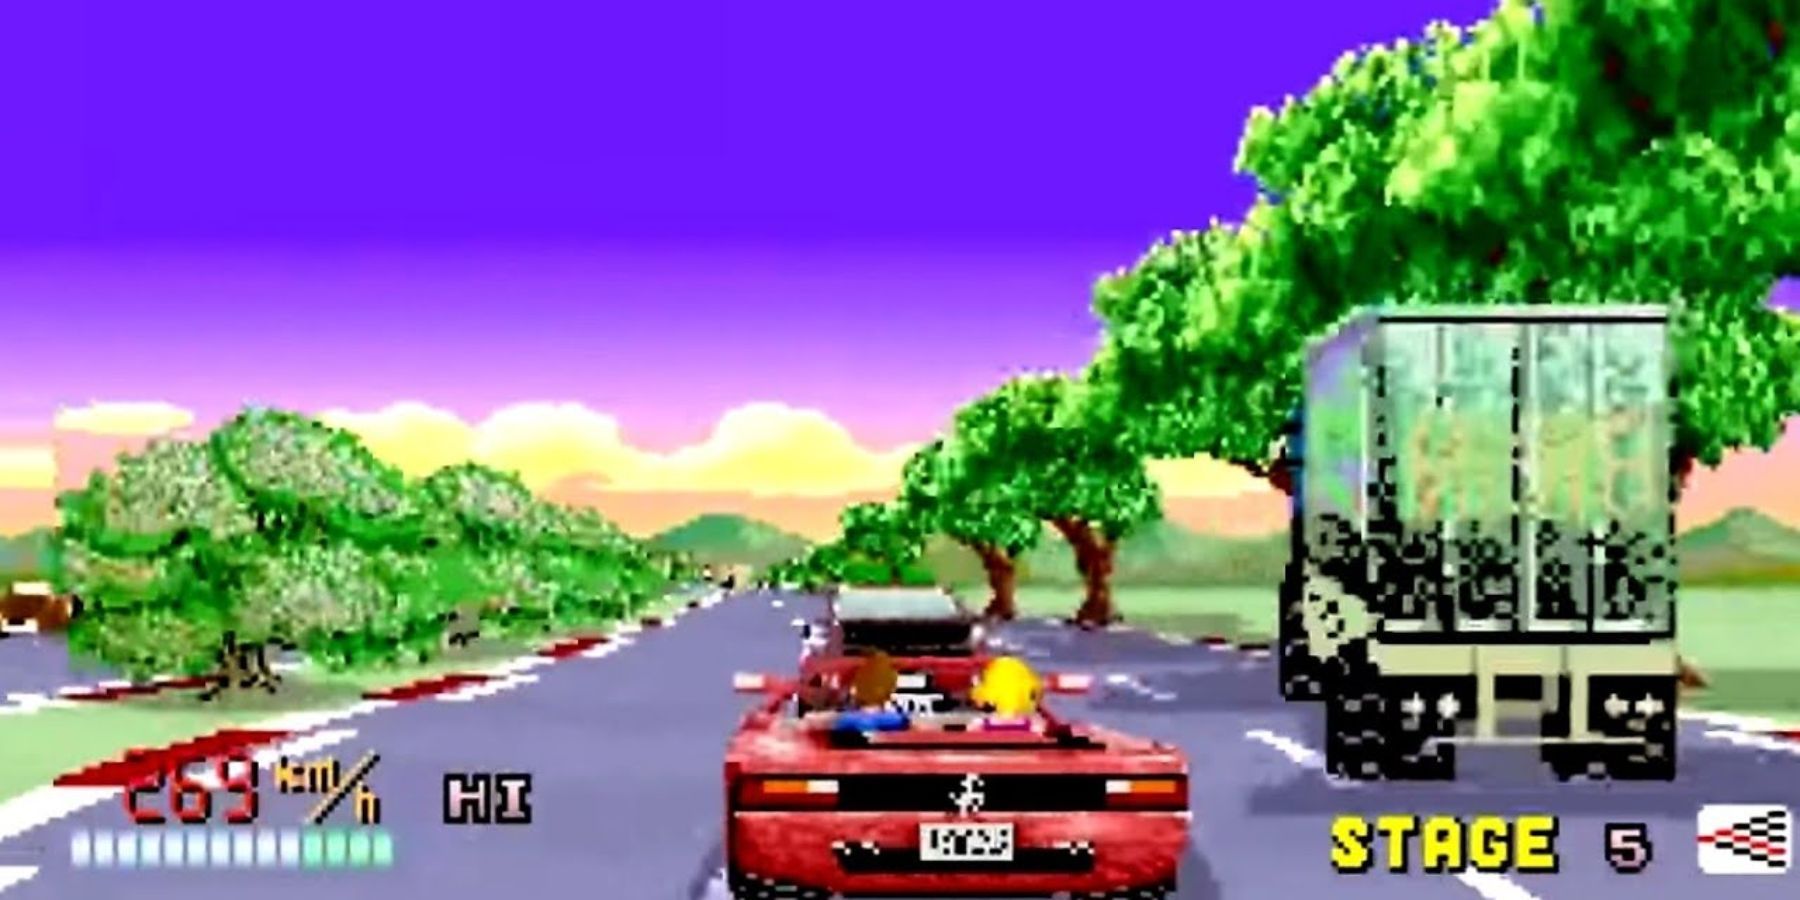 The player-controlled car driving down the road in Out Run